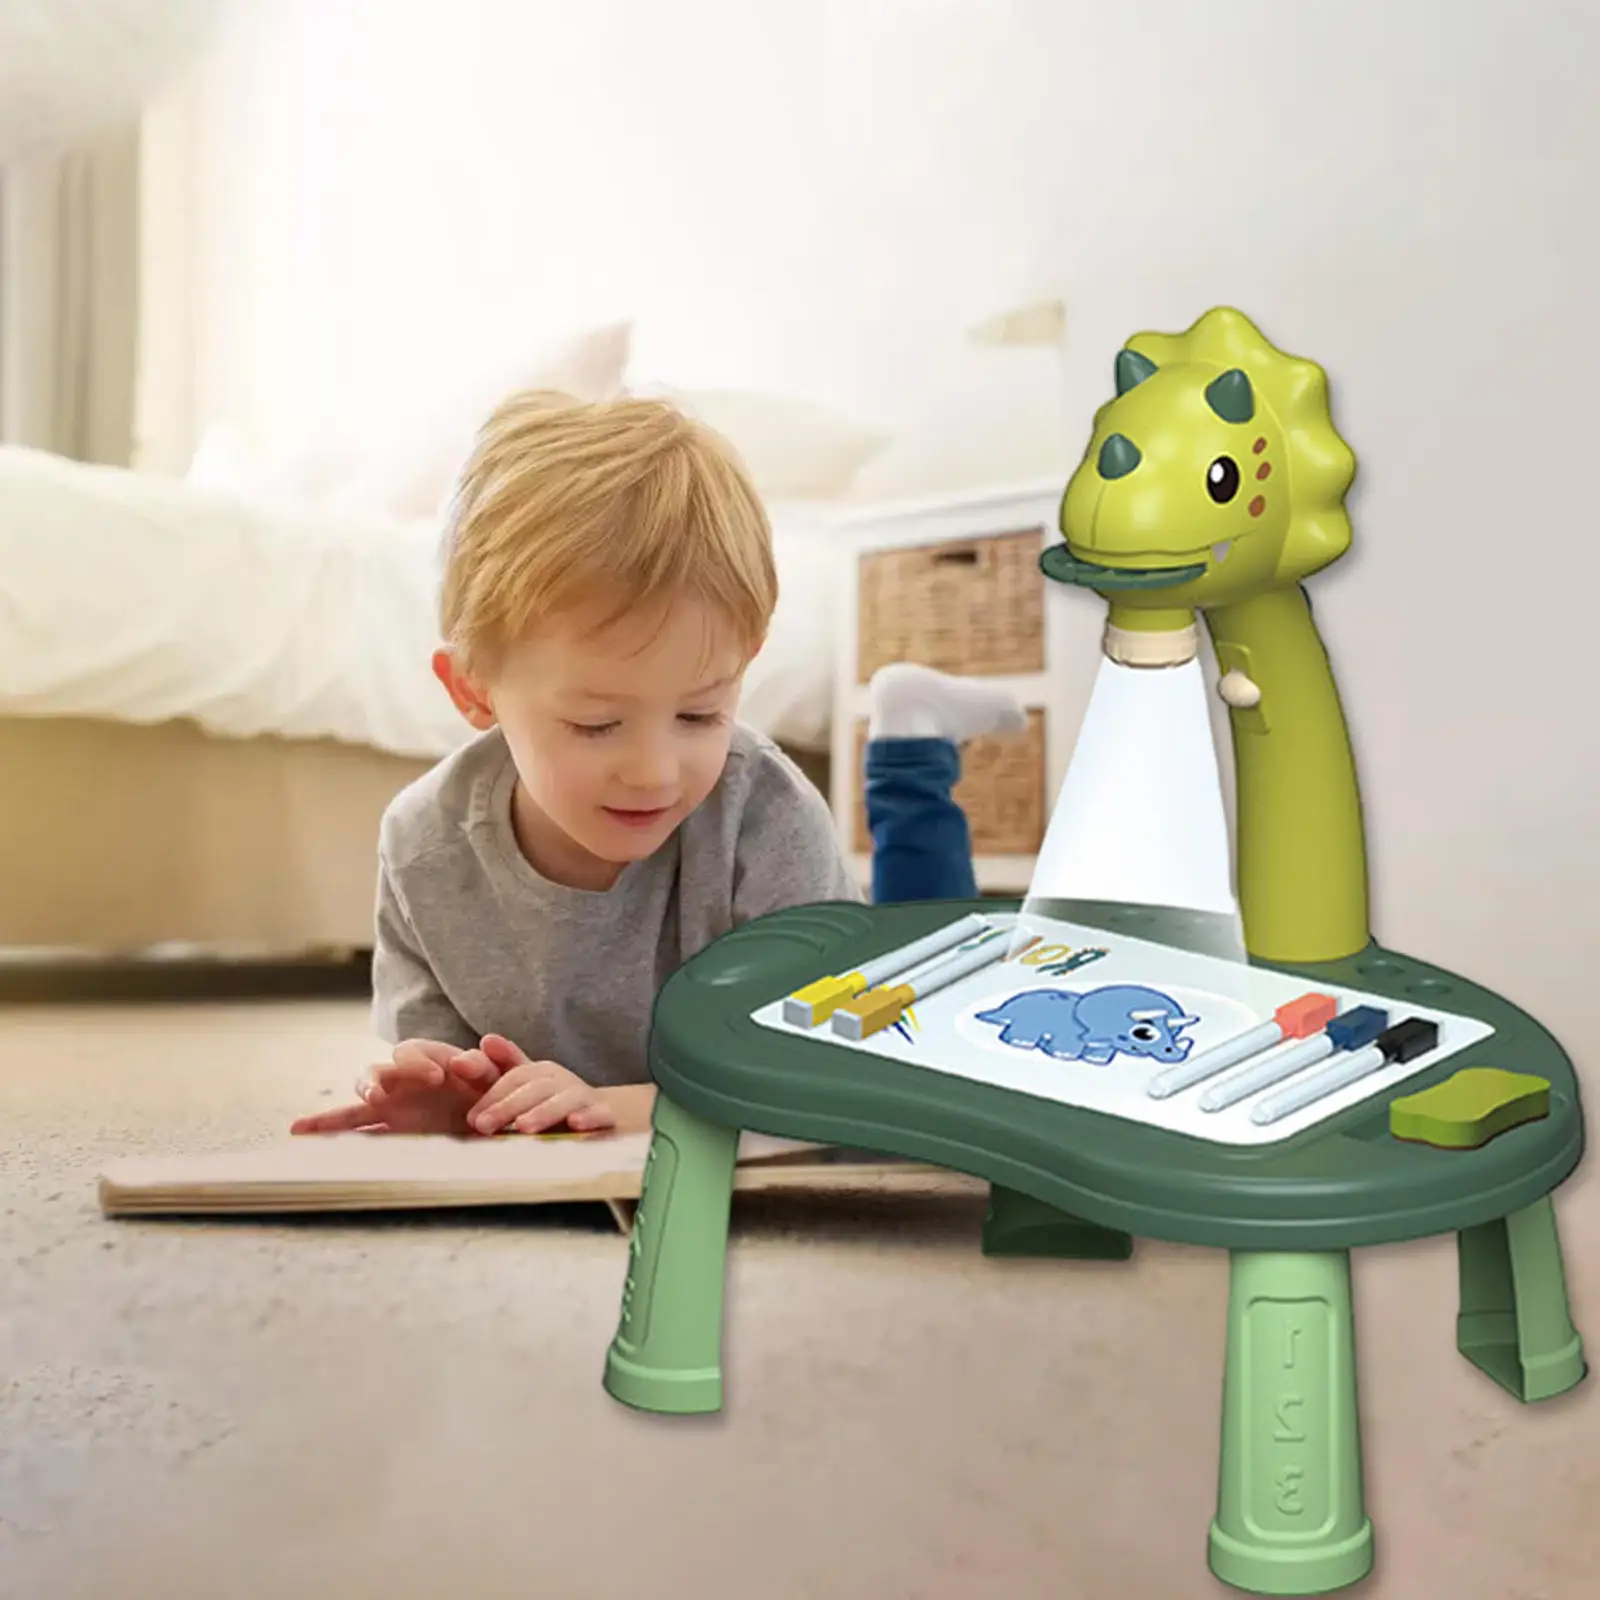 Projection Drawing Board Art Projector Table Paint Tools Toy Smart Sketcher Educational Toy For 3-8 Years Old